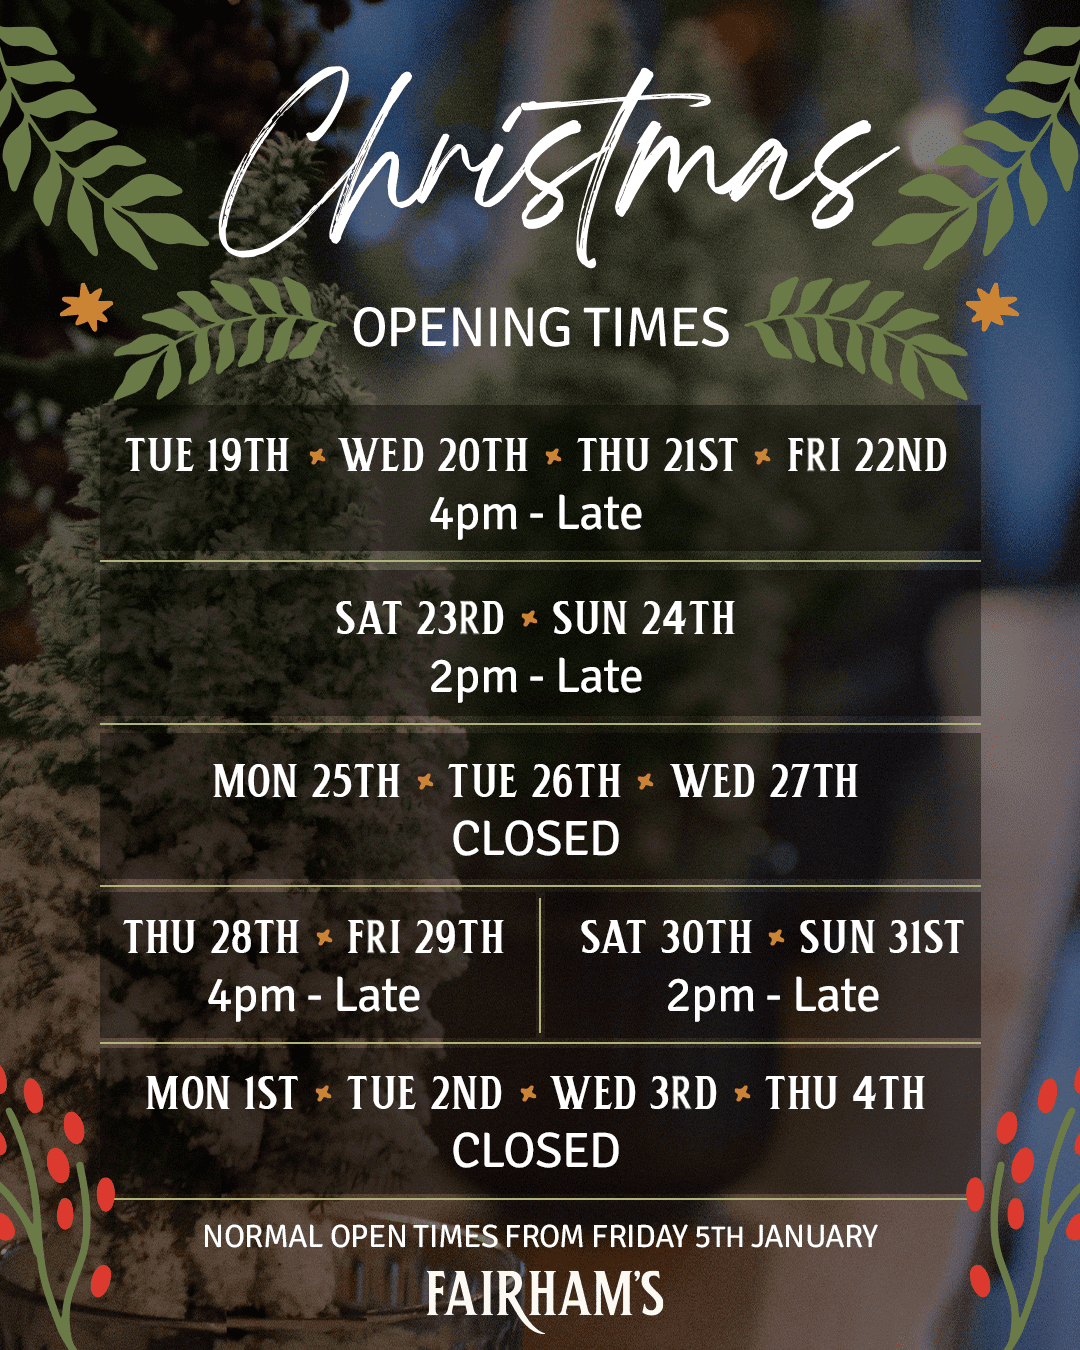 Fairhams bar in penwortham christmas opening times. Christmas night out in Penwortham with cocktails and events.